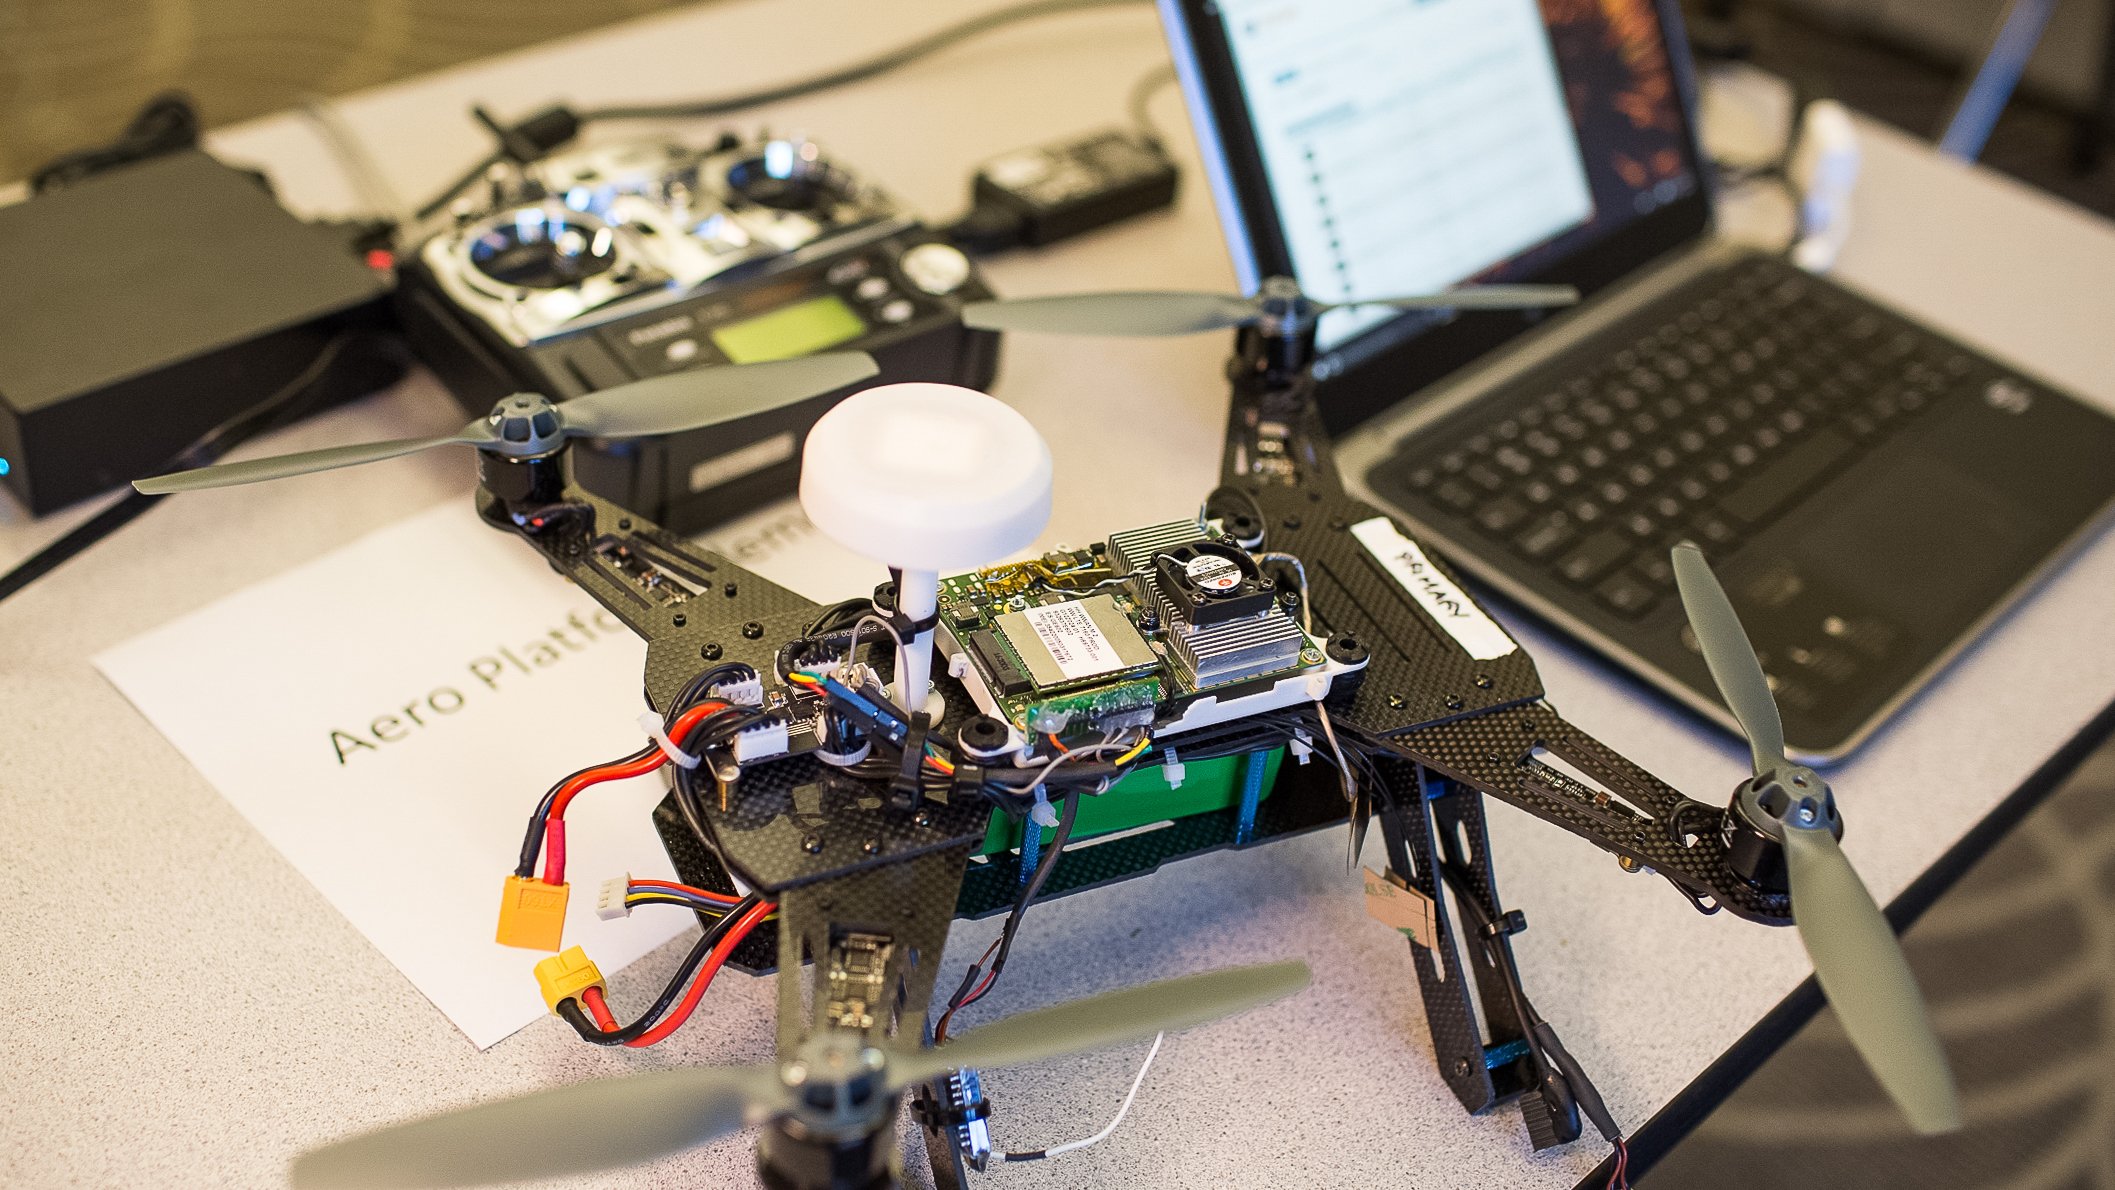 Intel on Twitter: "The Intel Aero Platform gives developers a quick way to  build and launch their own #drone applications #IDF16  https://t.co/0SsPzI2X2c" / Twitter